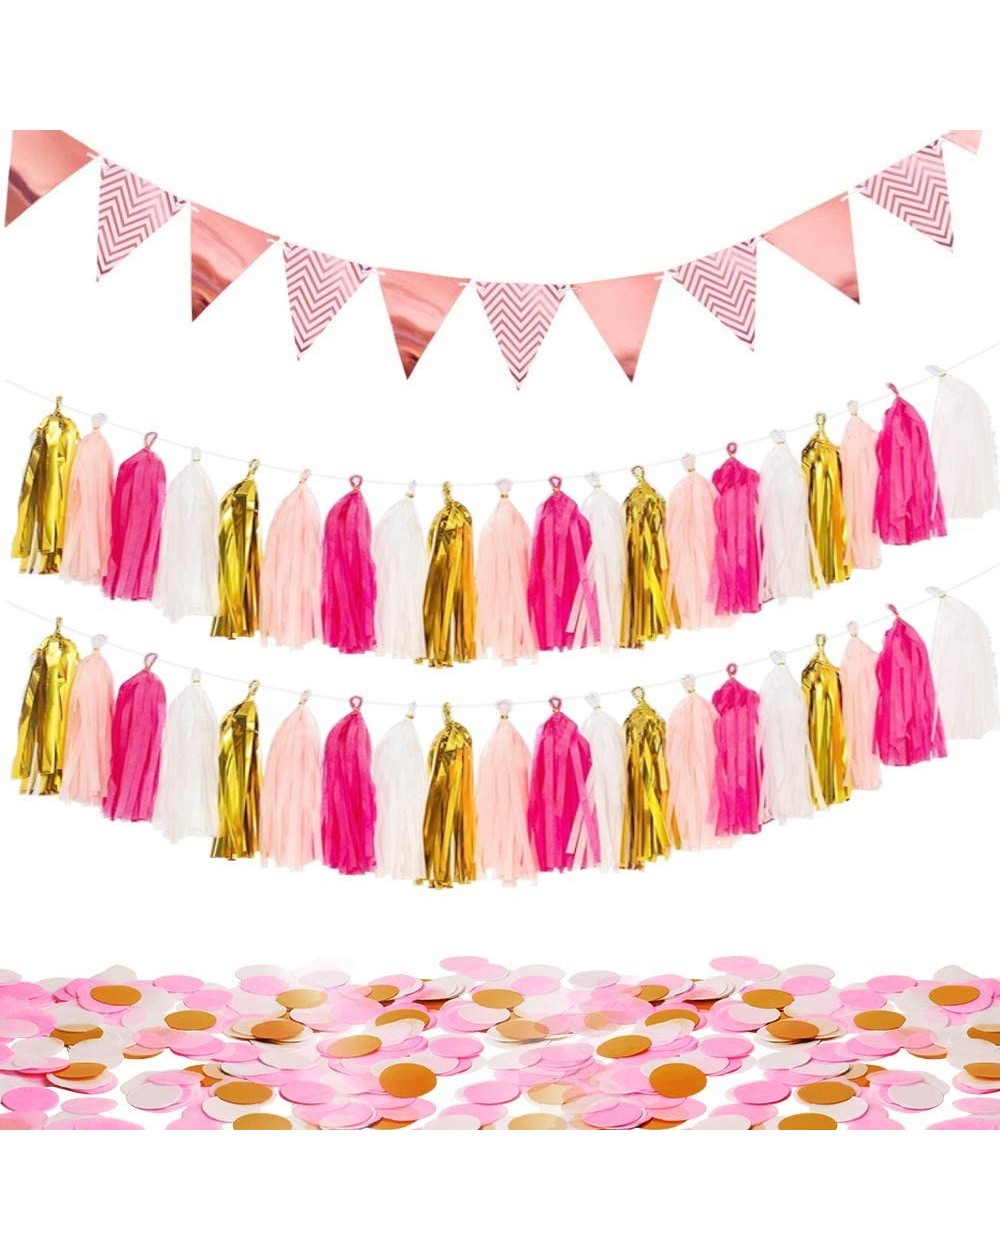 Banners & Garlands Sparkly 40PCS Gold Pink Tassel Garland and 15PCS Paper Pennant Banner Triangle Flags Bunting and 10g Gold ...